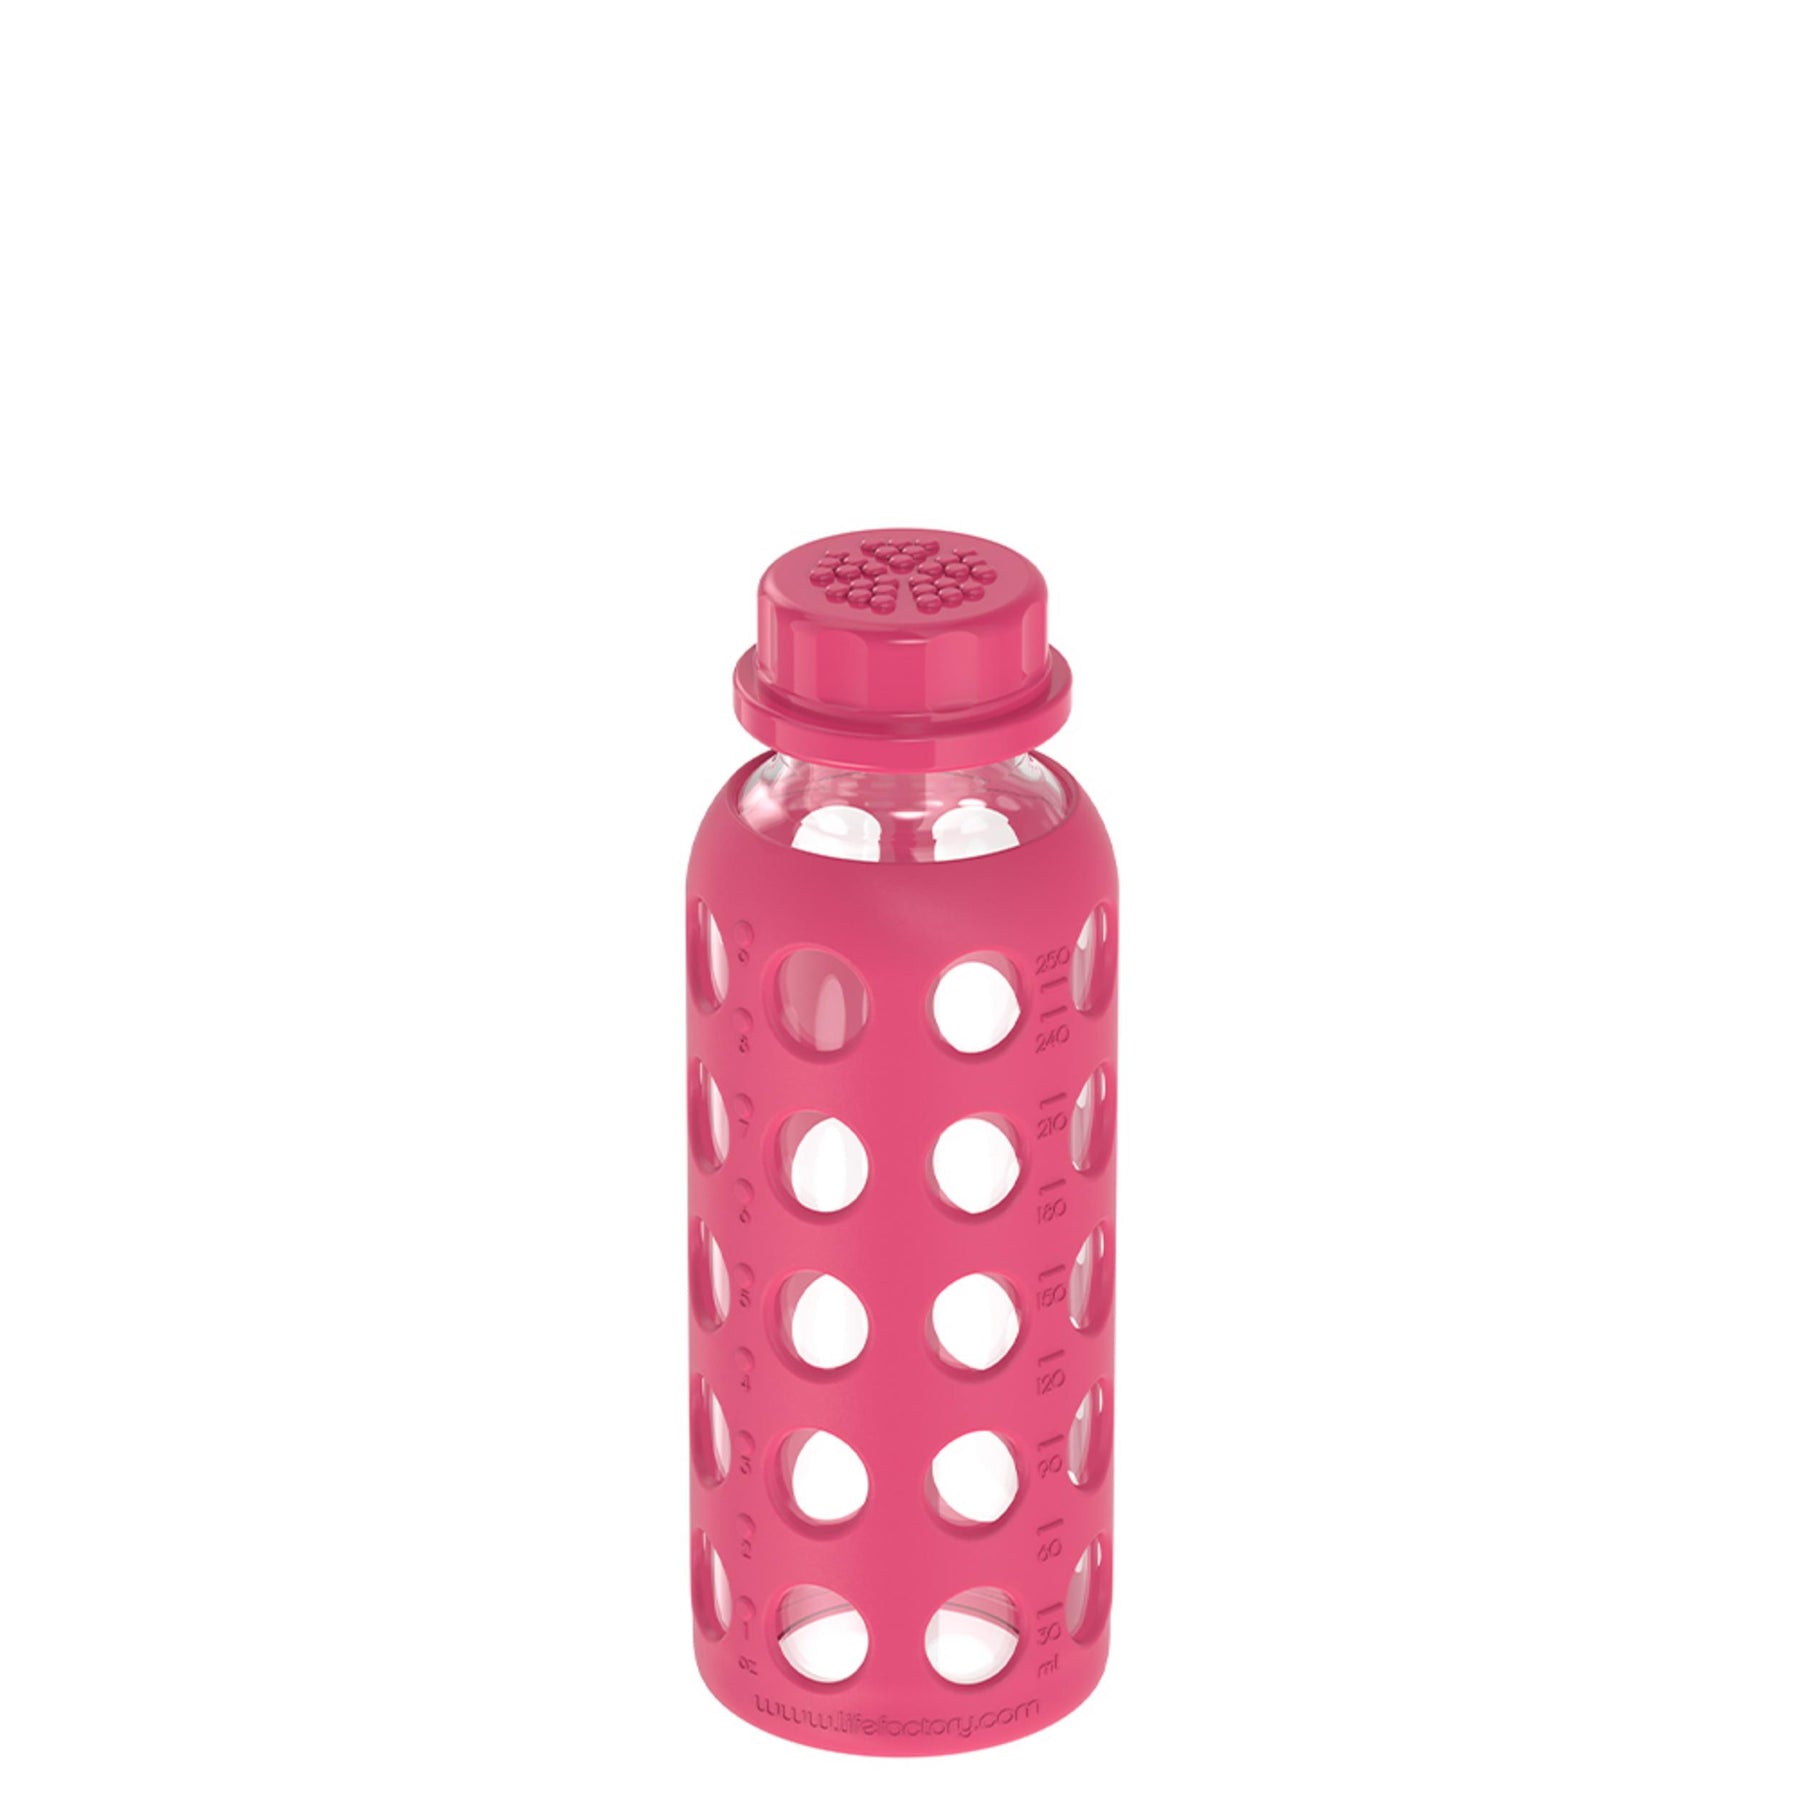 Eco Friendly Home :: 16 oz Glass Bottle with Straw Cap and Silicone Sleeve  by Life Factory - Red - Little For Now - Cloth Diapers and other Eco  Friendly Baby Products